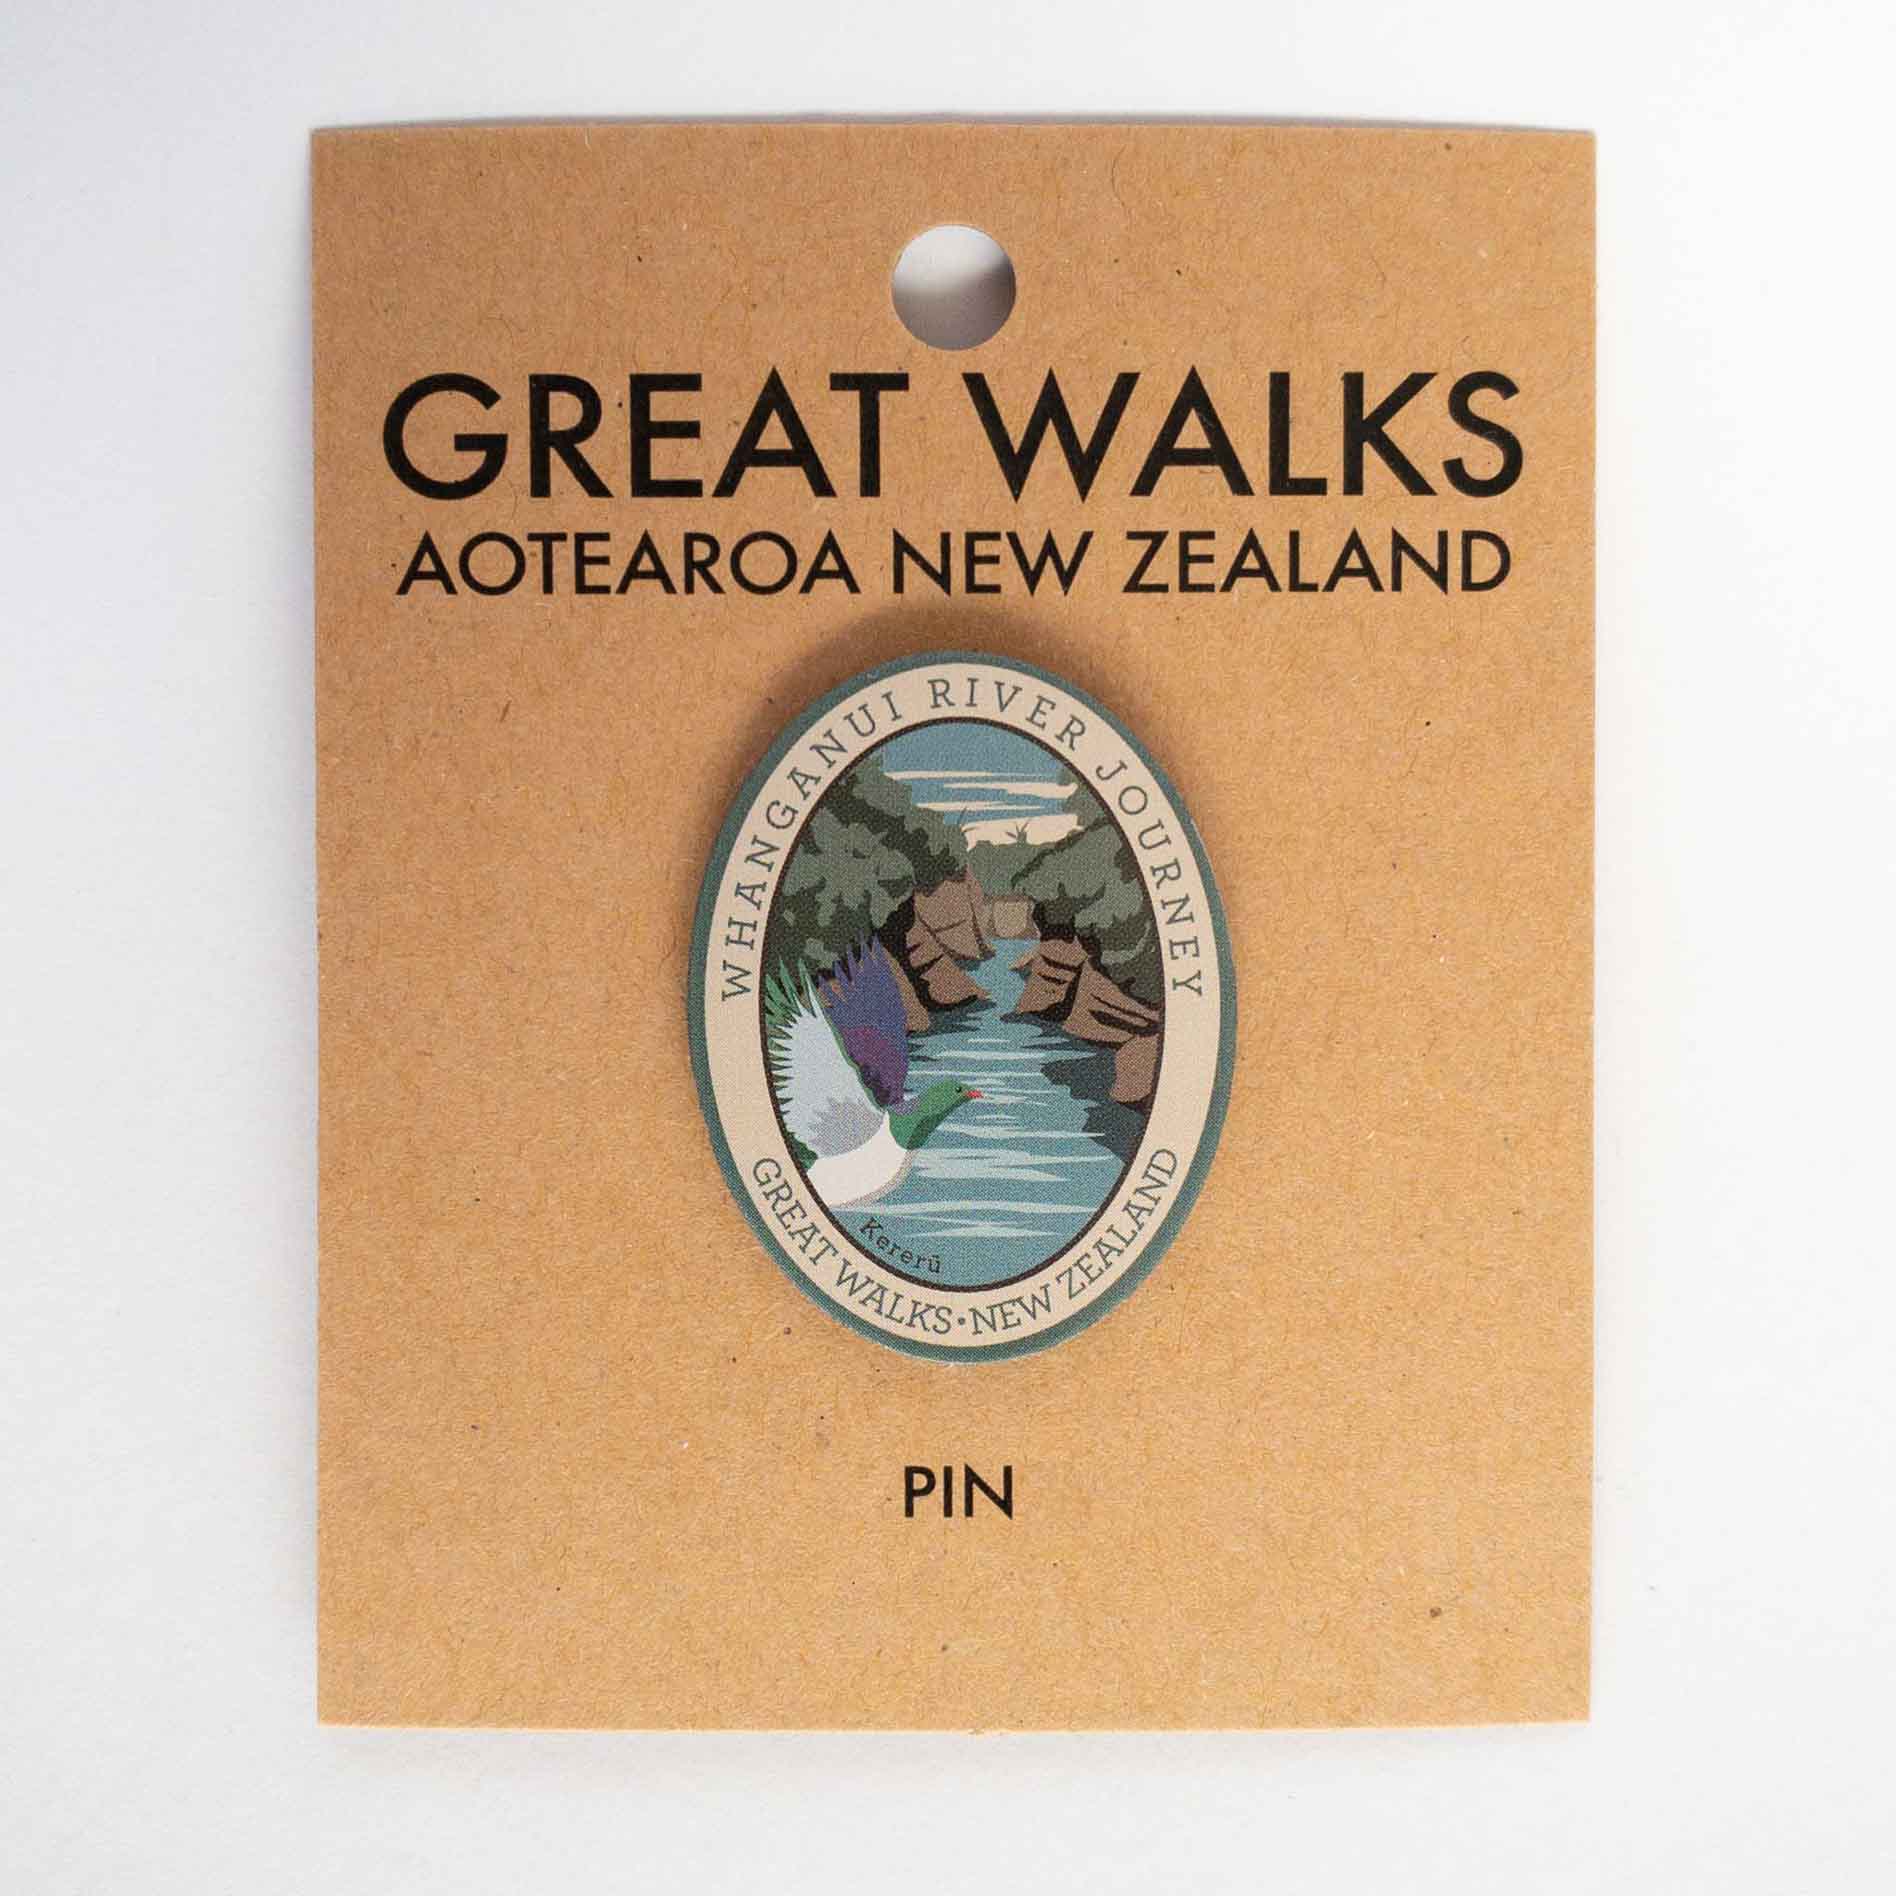 Oval Rakiura Track pin, with a brown kiwi, orange sky, and a chain link sculpture, on brown kraft backing card.